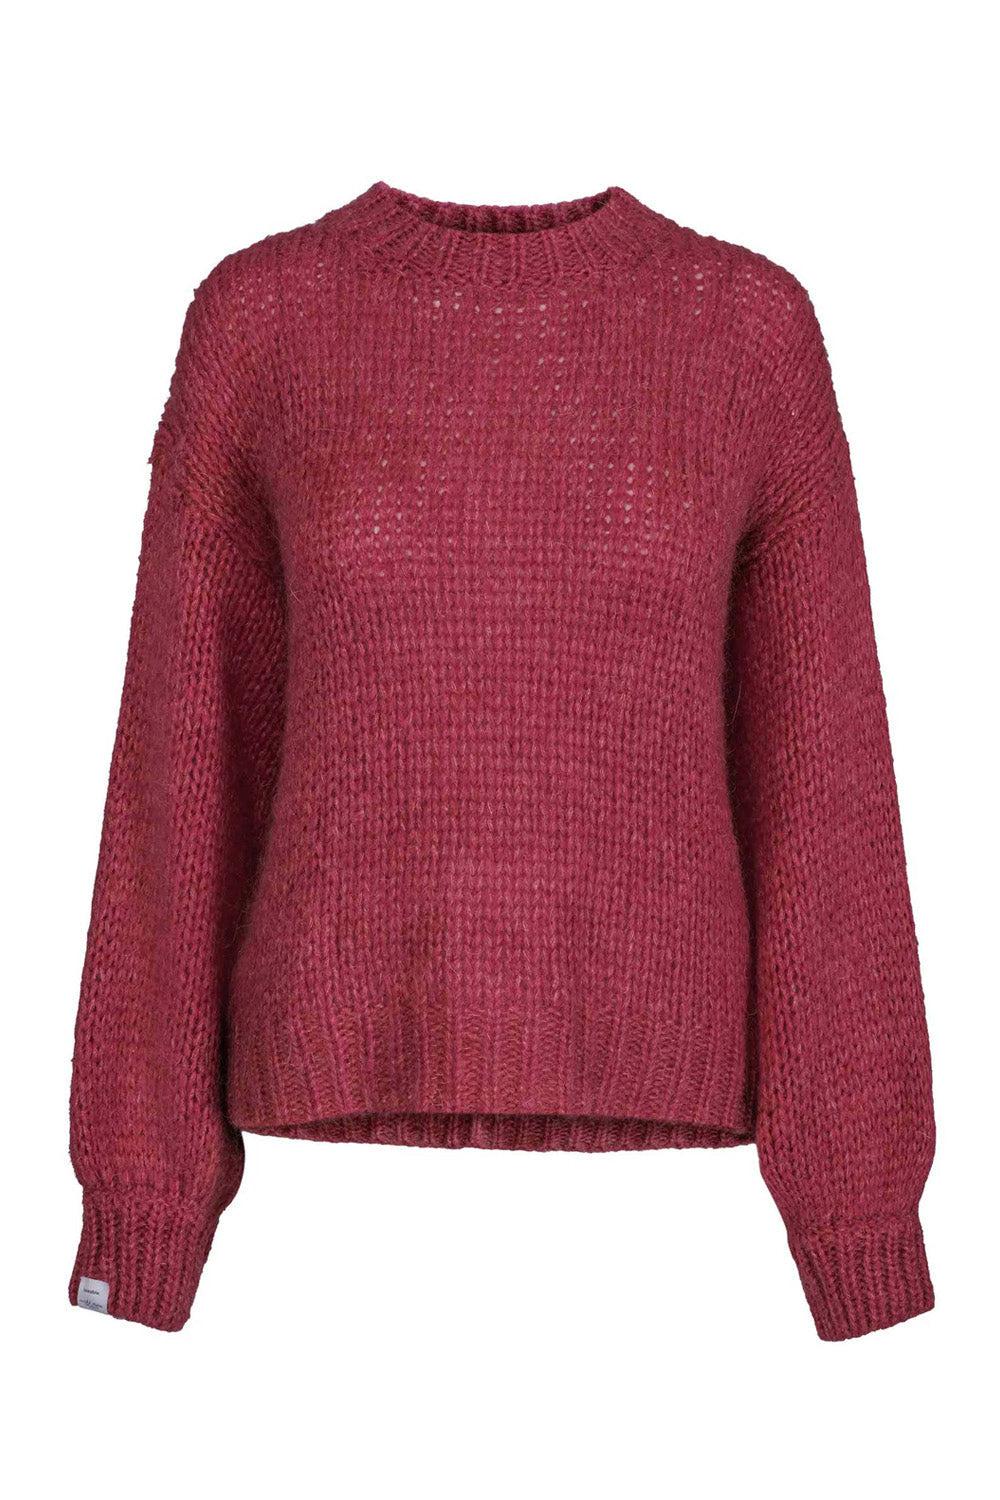 Florie RN Sweater Teaberry